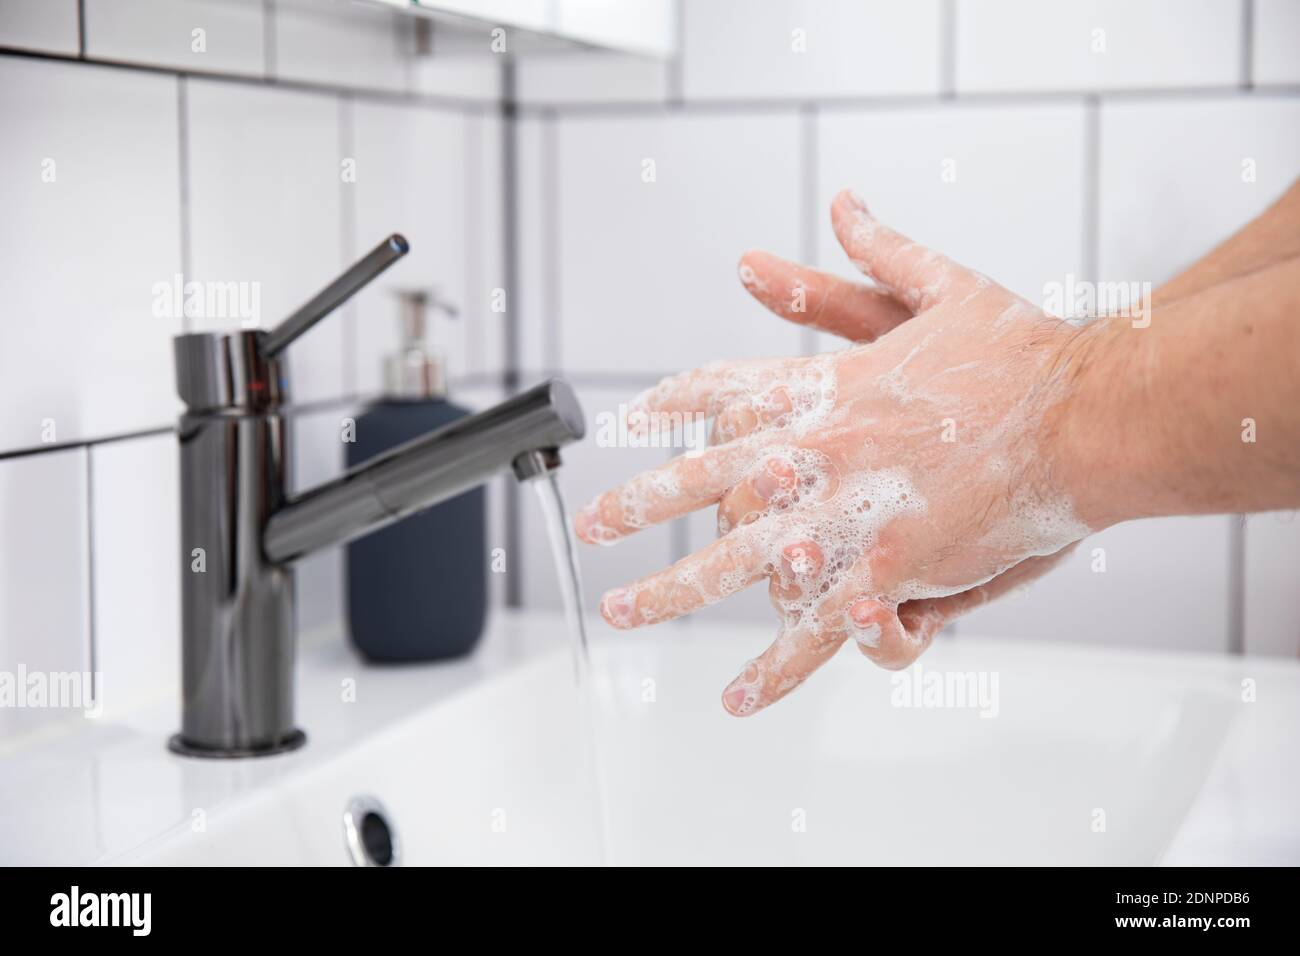 Close-up of person washing hands Stock Photo